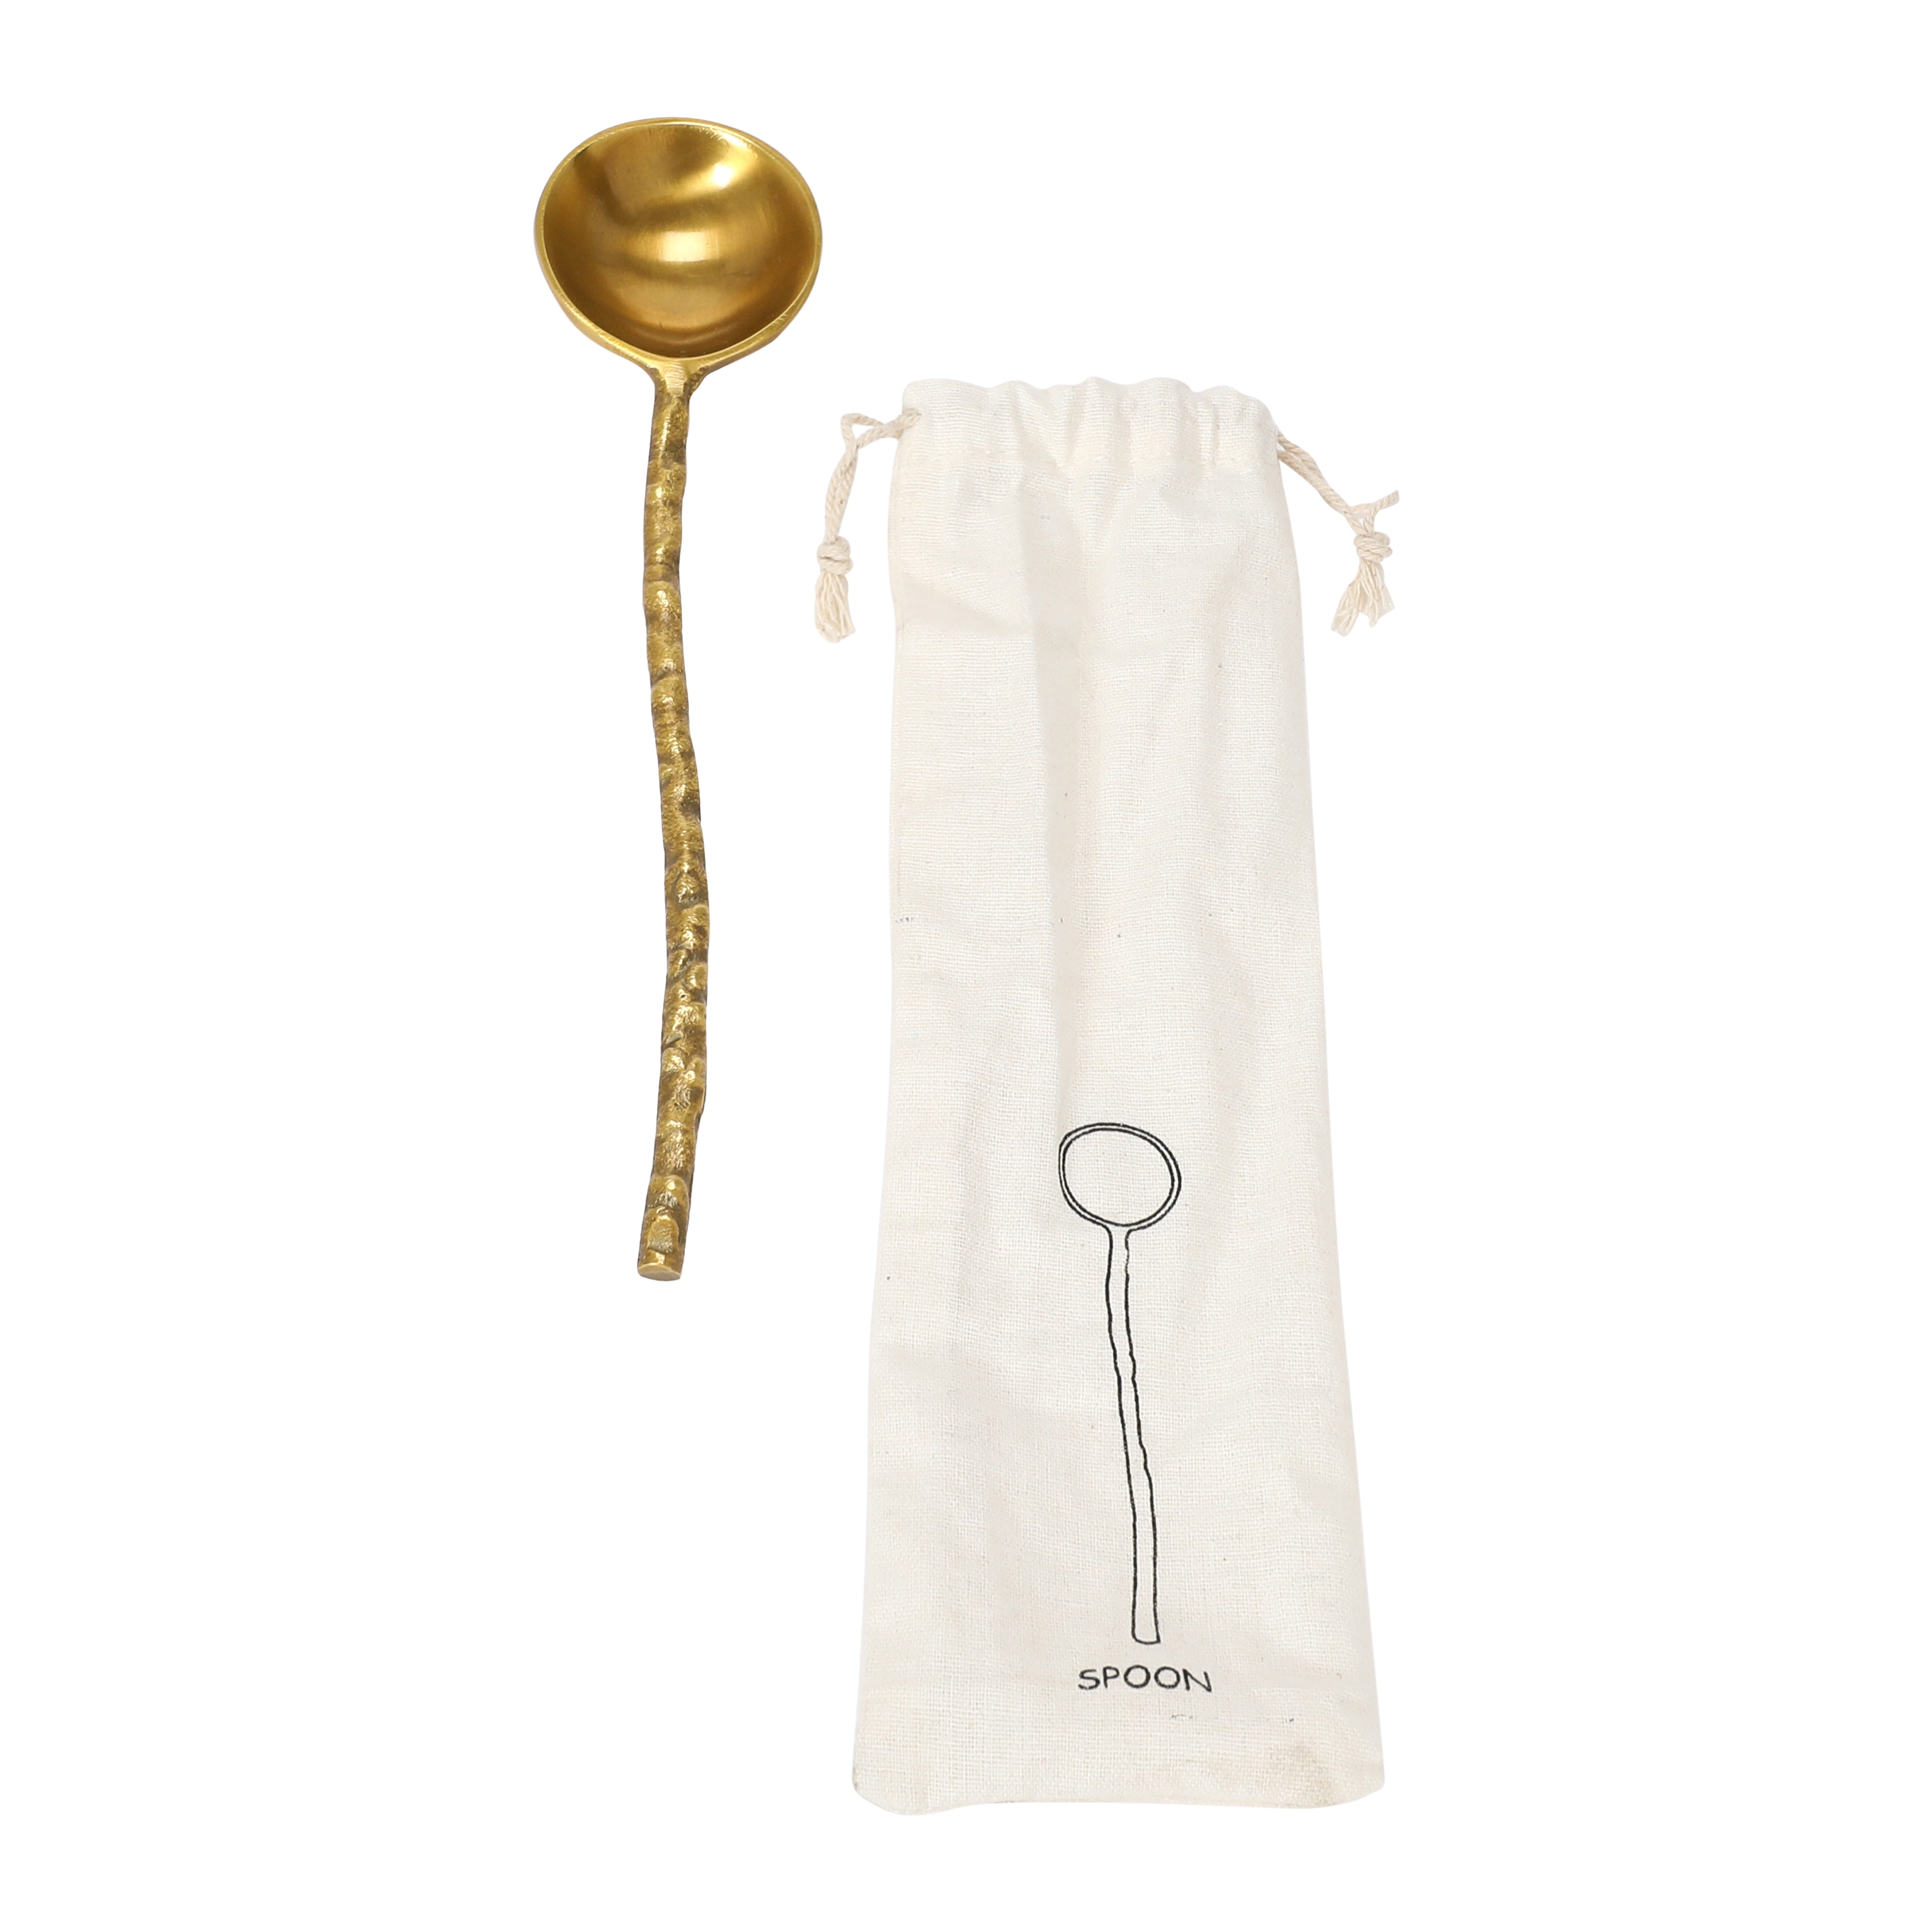  Brass Serving Spoon with Hammered Handle in Printed Drawstring Bag - Image 0